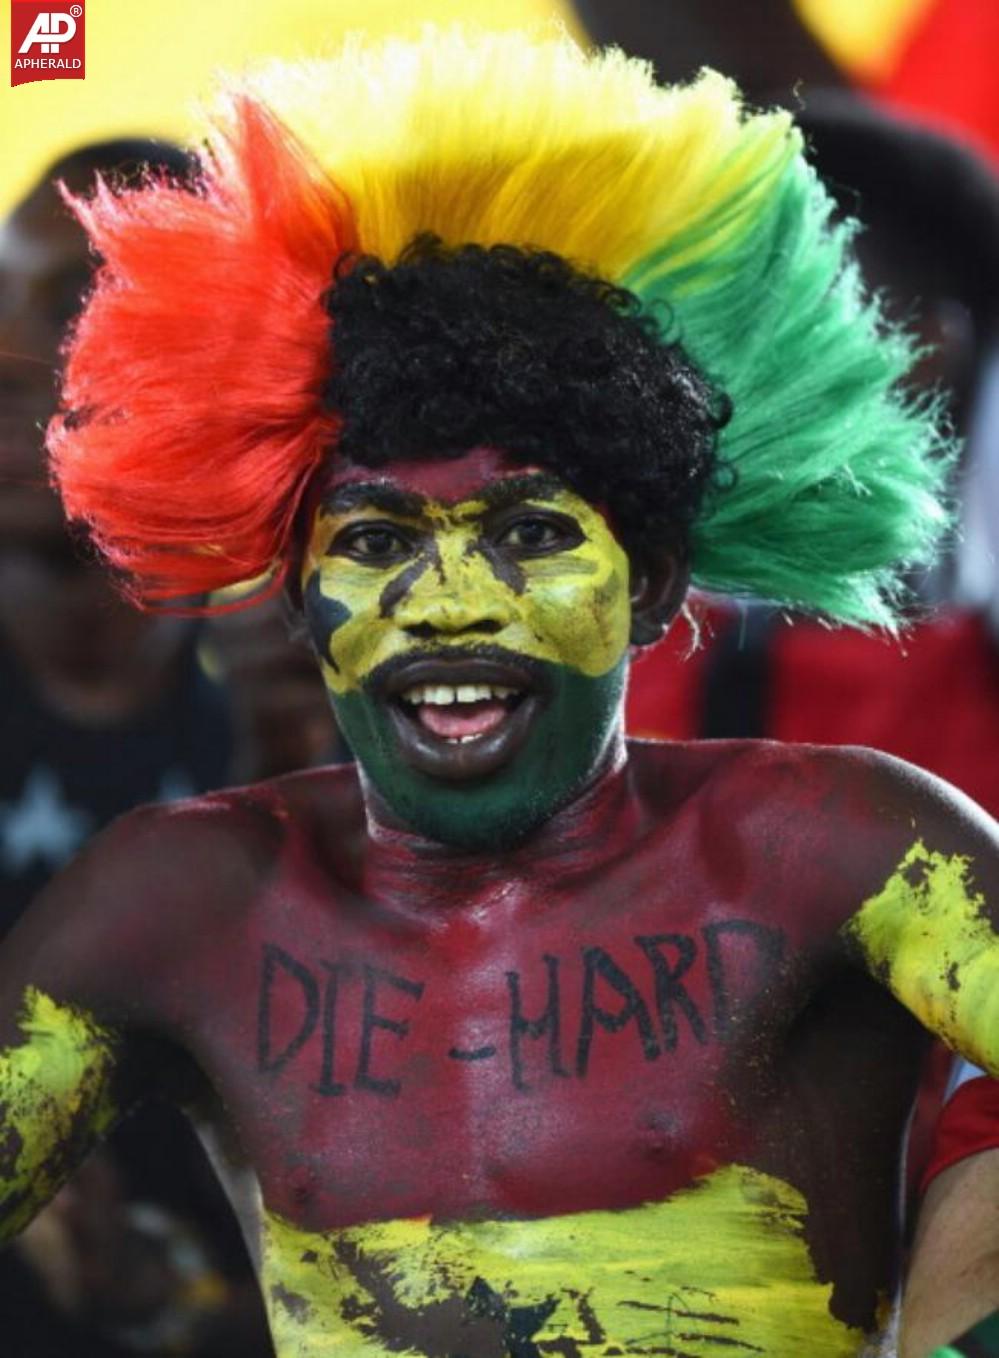 FIFA World Cup 2014 Fans With Face Paint